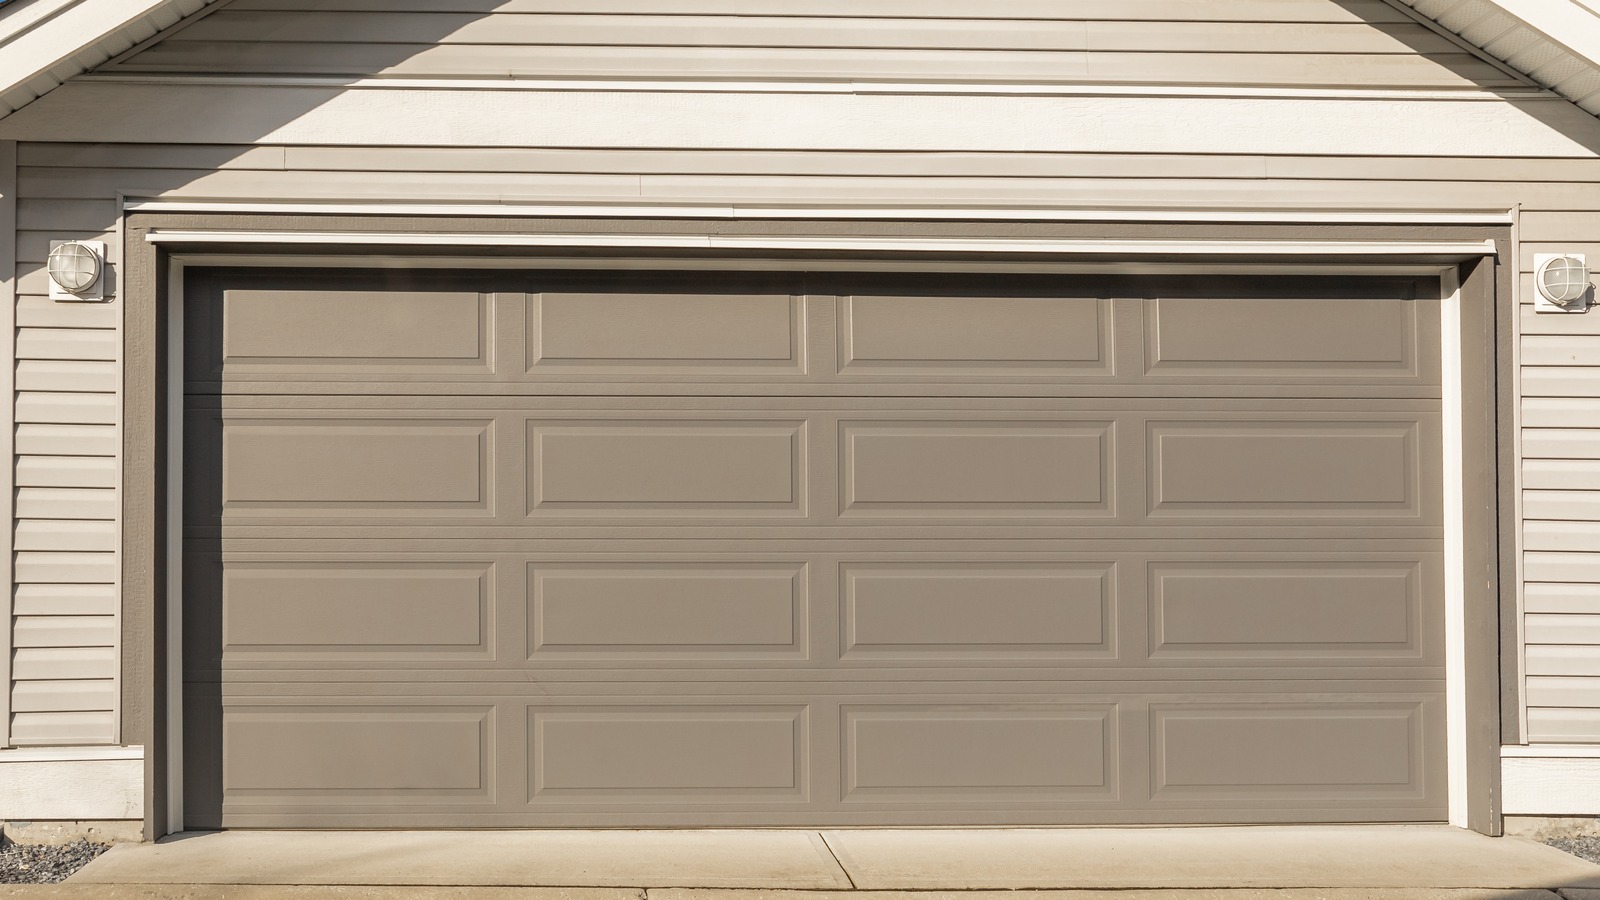 How Much Does a Garage Add to Home Value?